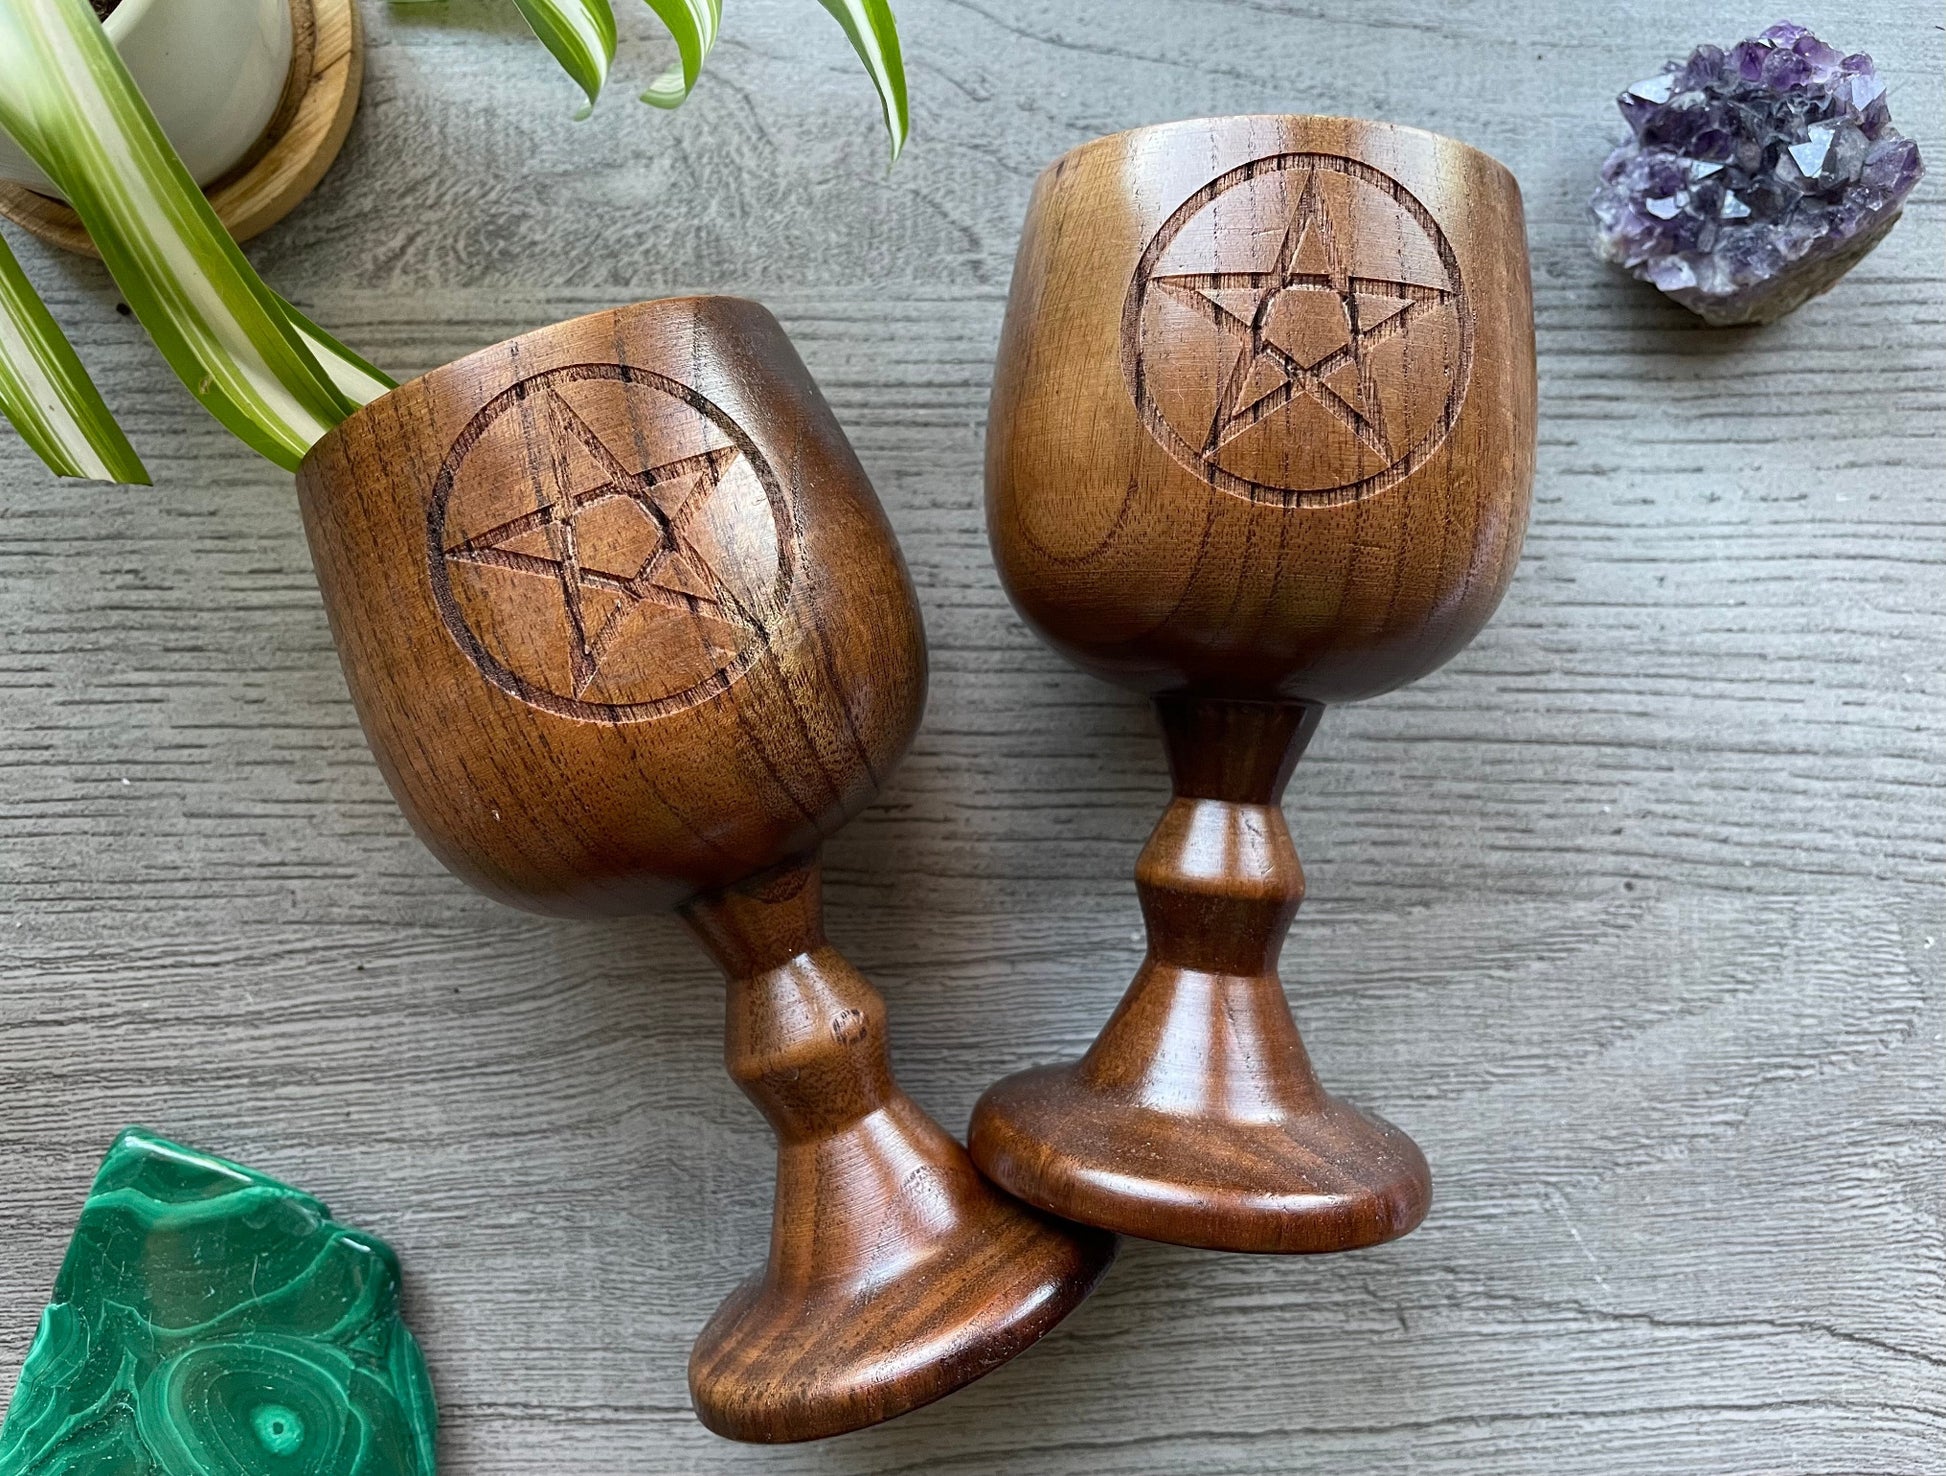 Pictured are various wood goblets with pentagrams on them.